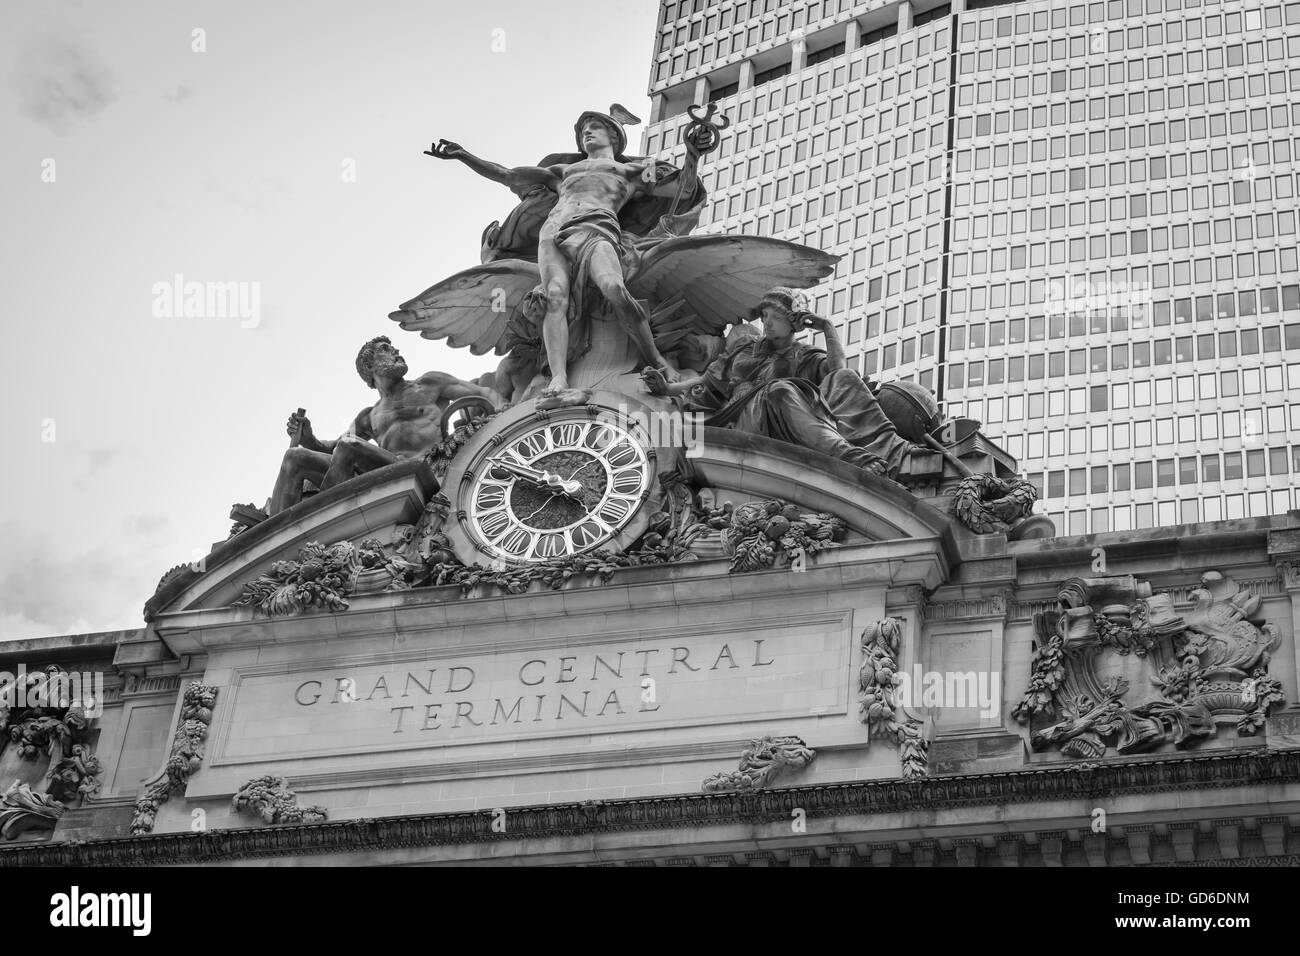 Grand Central Terminal in New York City. Stock Photo